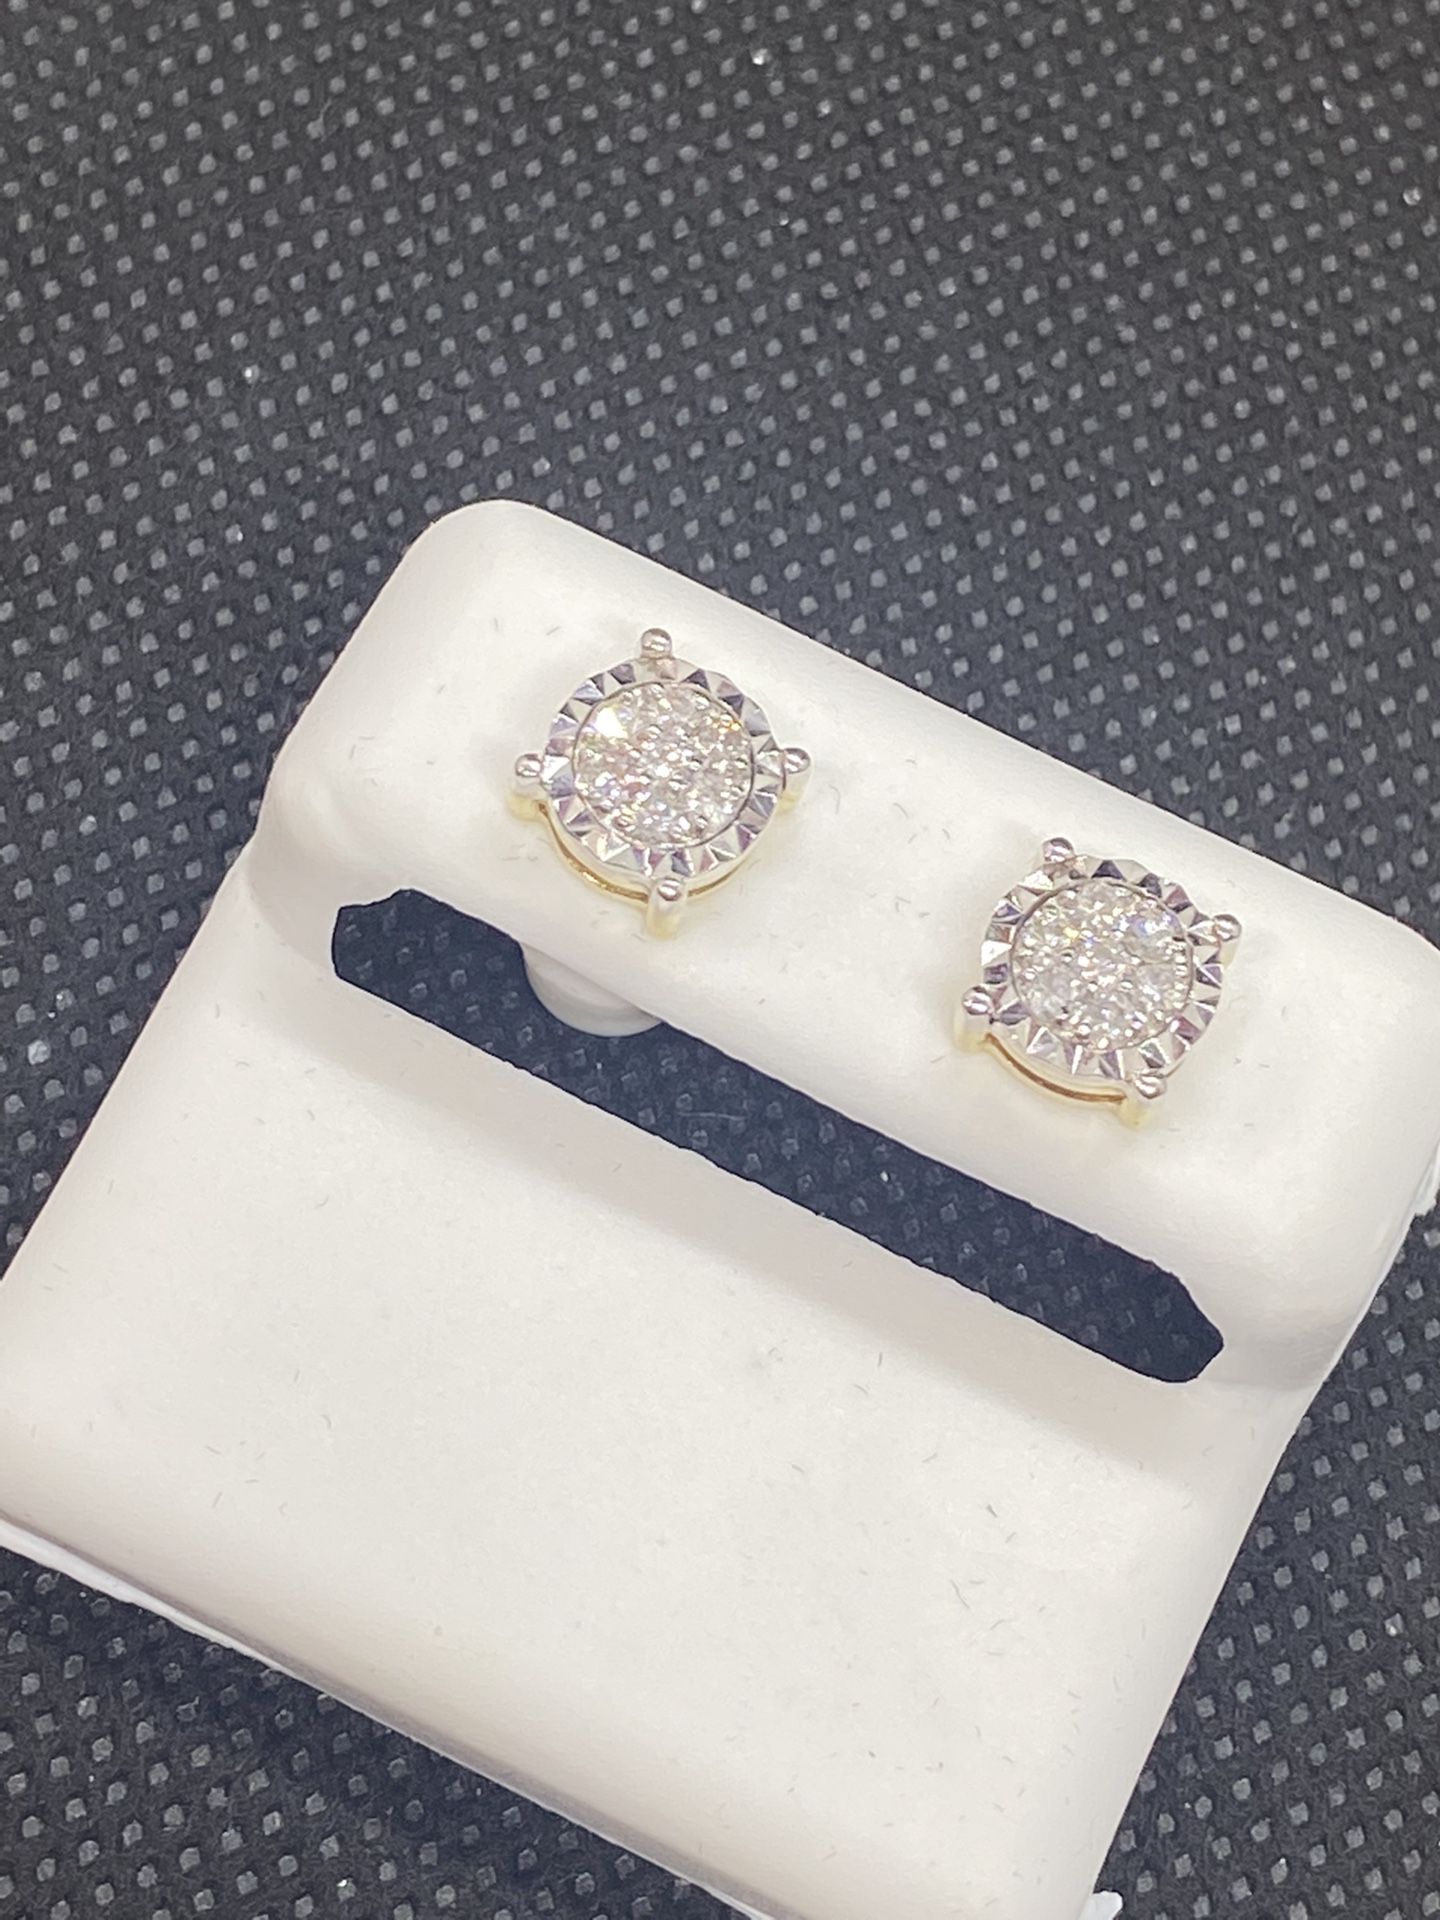 10KT GOLD AND DIAMOND EARRINGS OF 0.54 CTW AVAILABLE ON SPECIAL SALE 